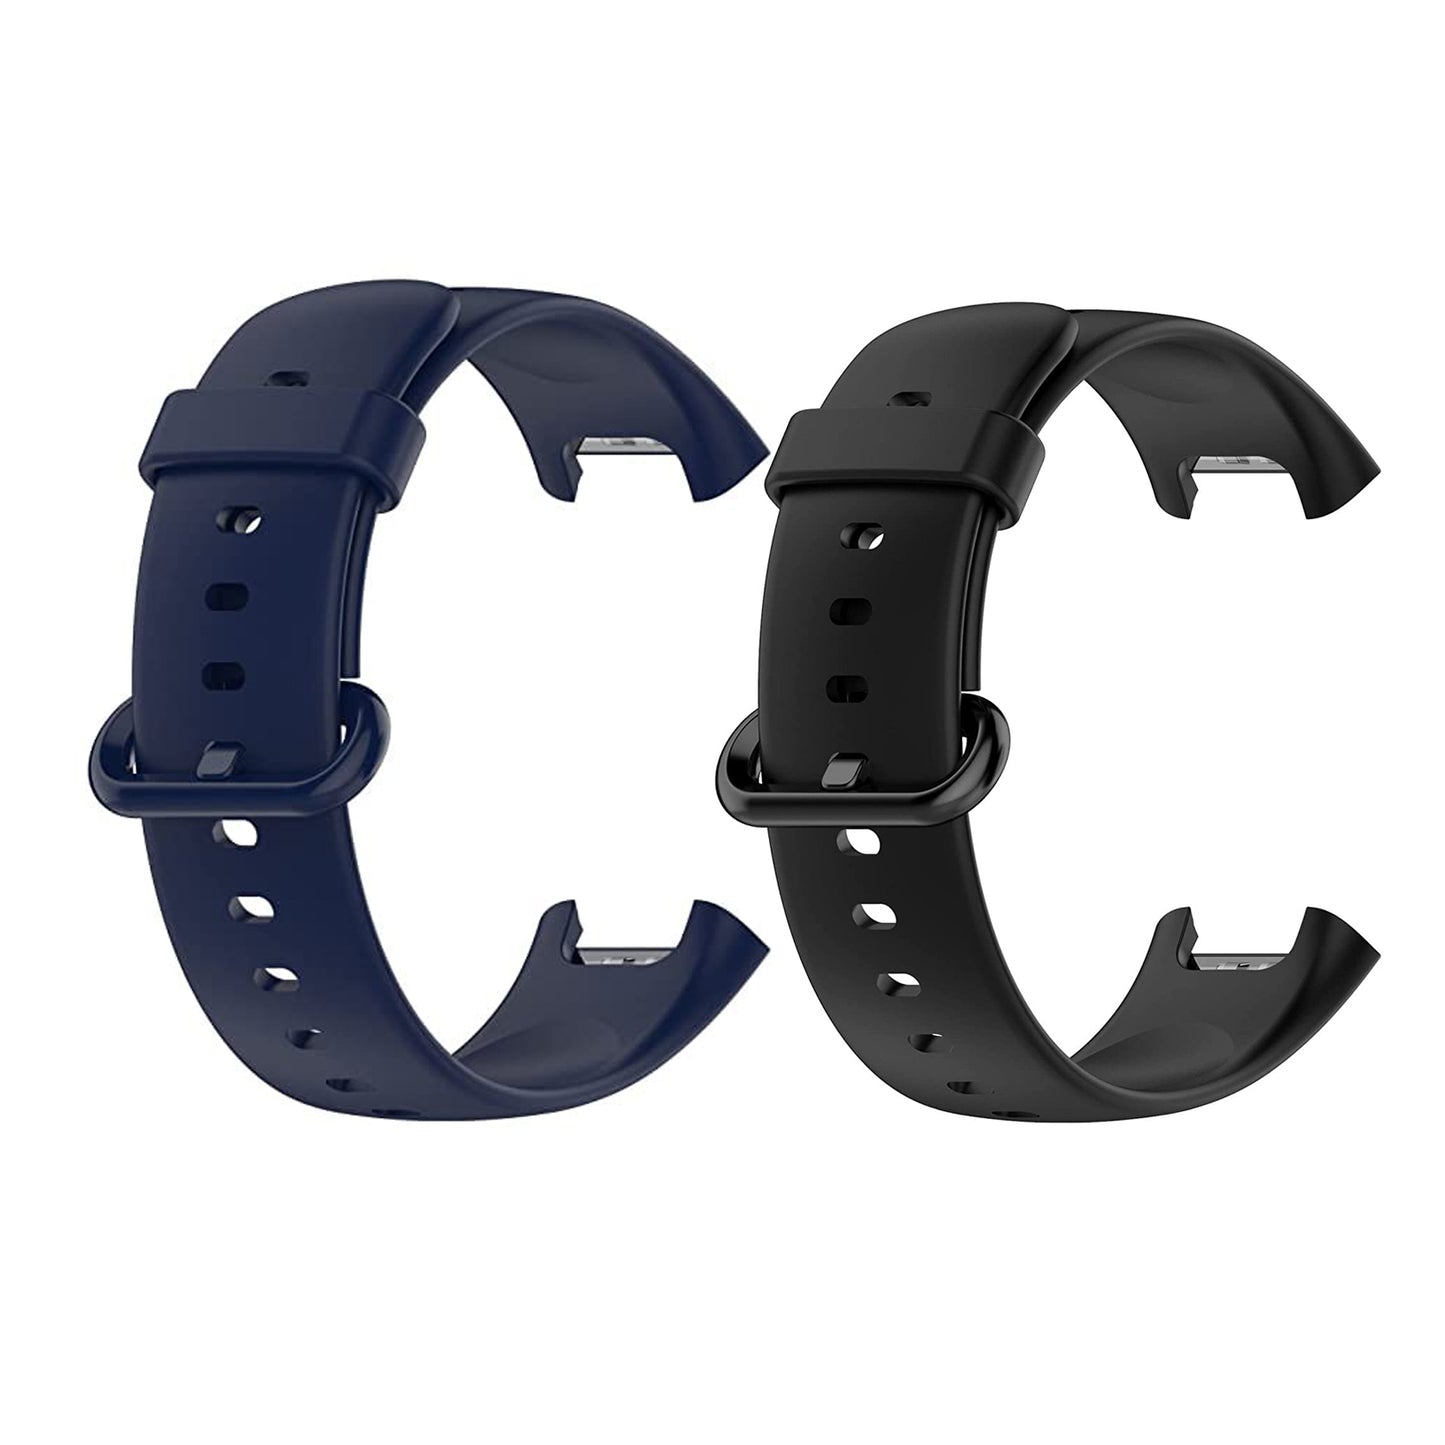 Valente Soft Silicone Buckle watch Strap Compatible for Redmi Watch 2 Lite & Redmi GPS Watch Only (Watch Not included) (Pack of 2)